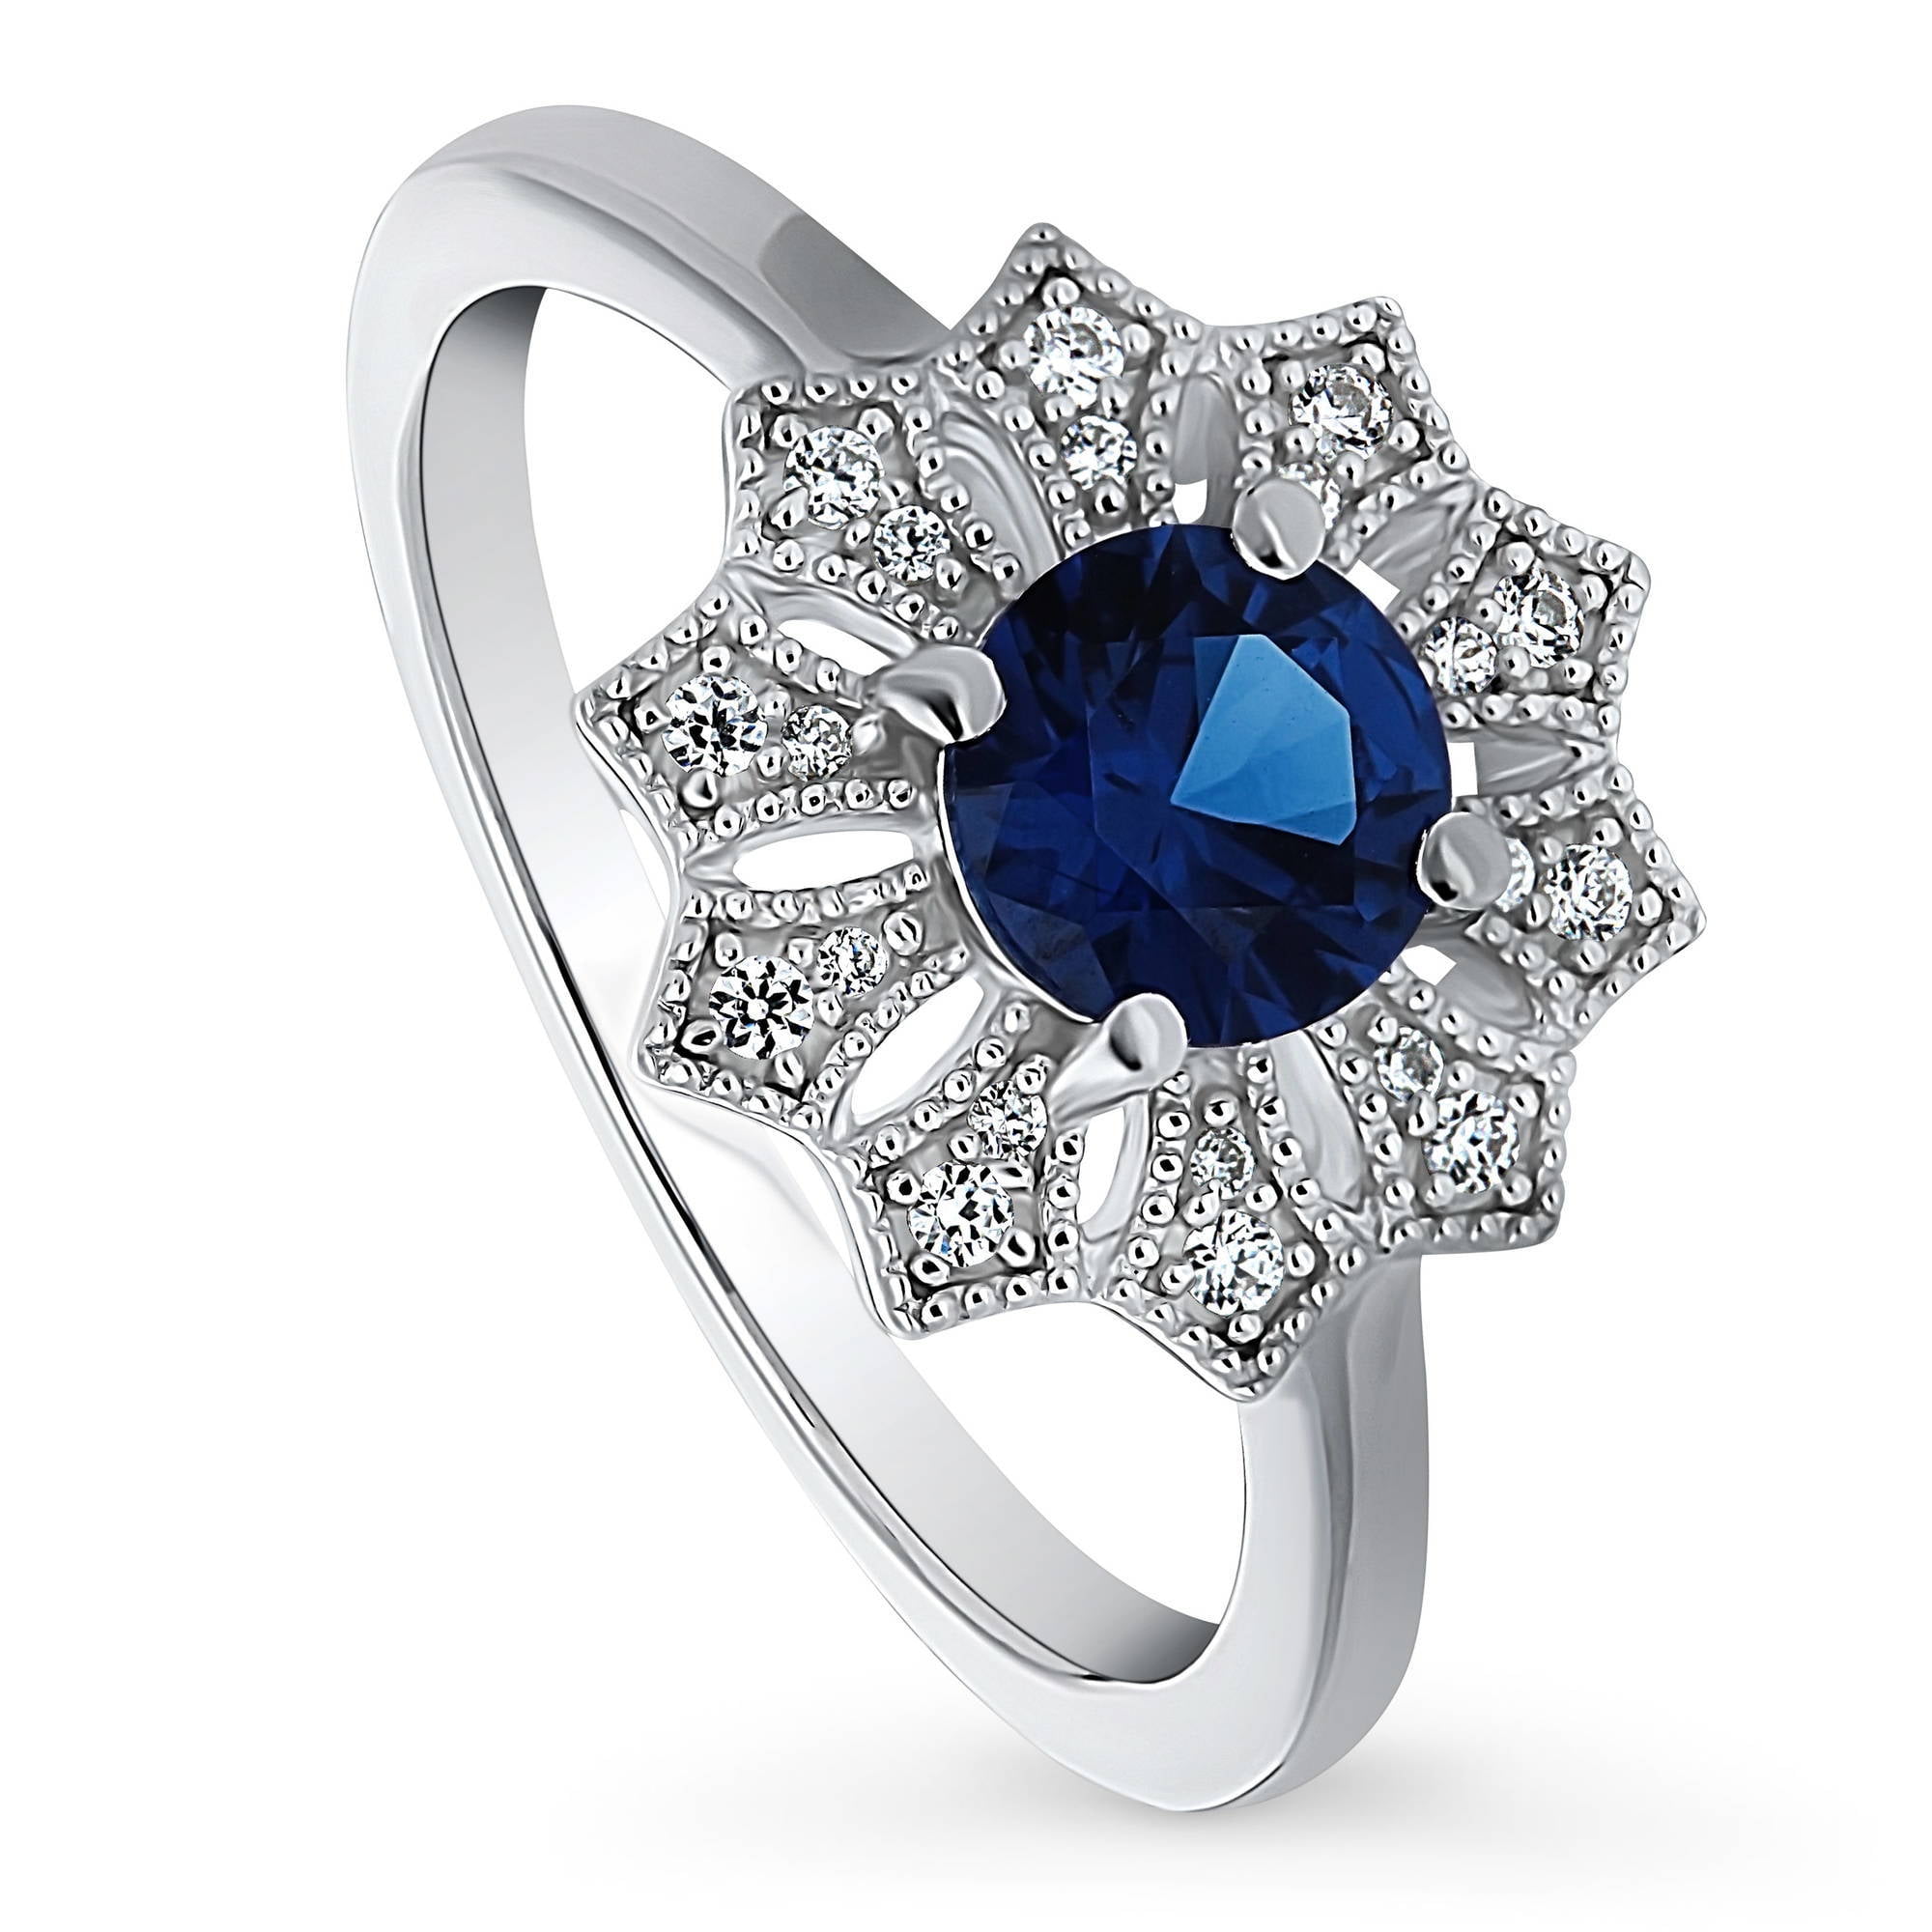 BERRICLE Sterling Silver Flower Blue Cubic Zirconia CZ Halo Fashion Ring  for Women, Rhodium Plated Size 6